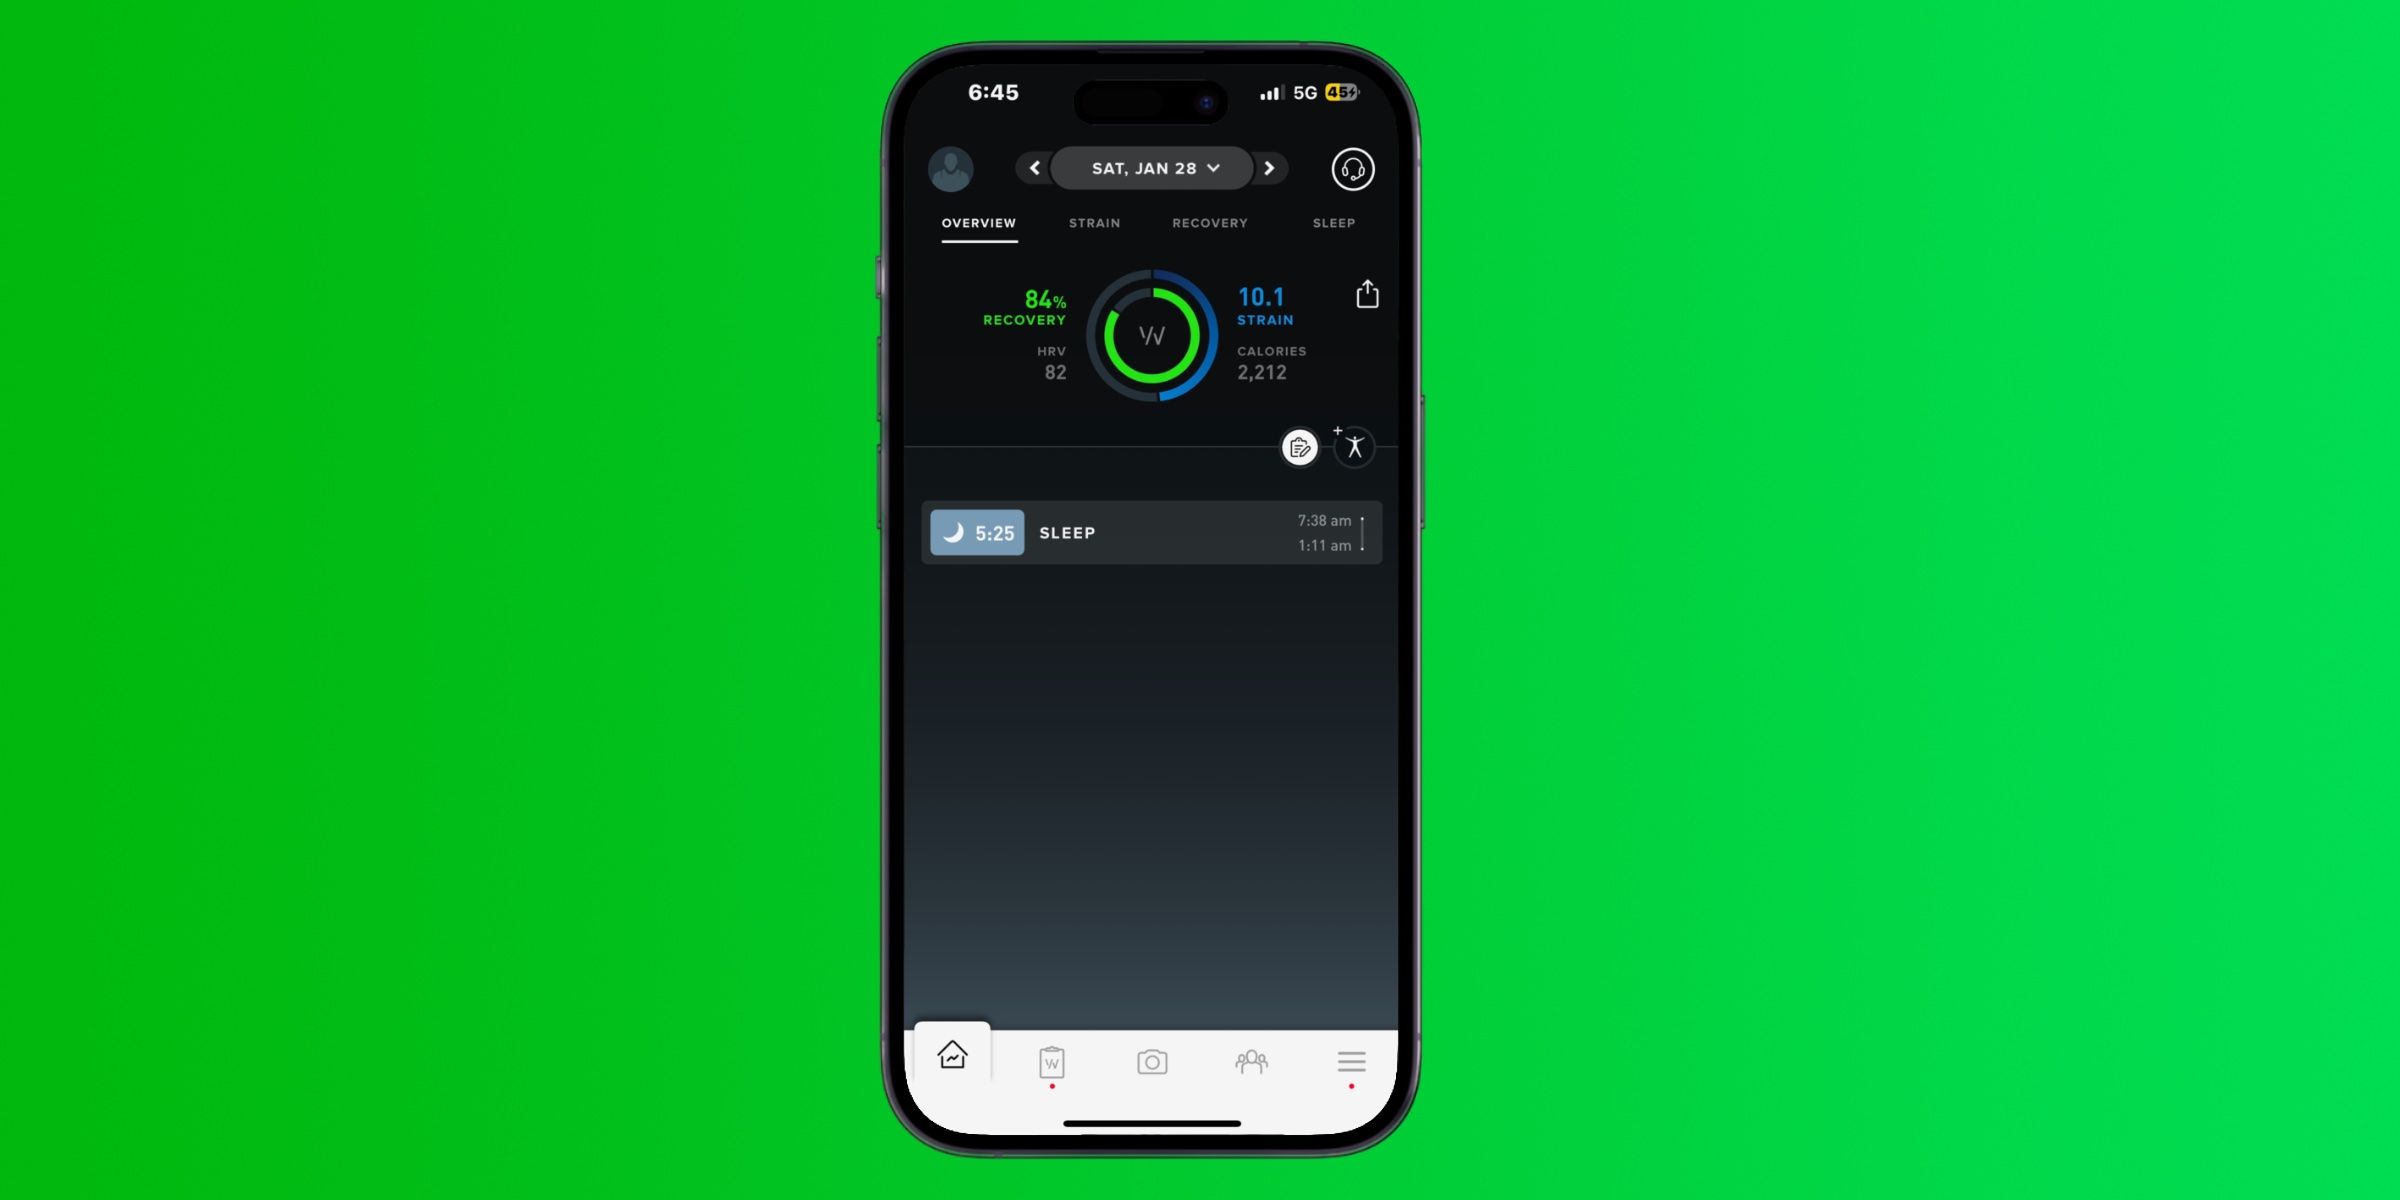 The Whoop App on an iPhone 14 Pro showing daily strain, recovery, and sleep.